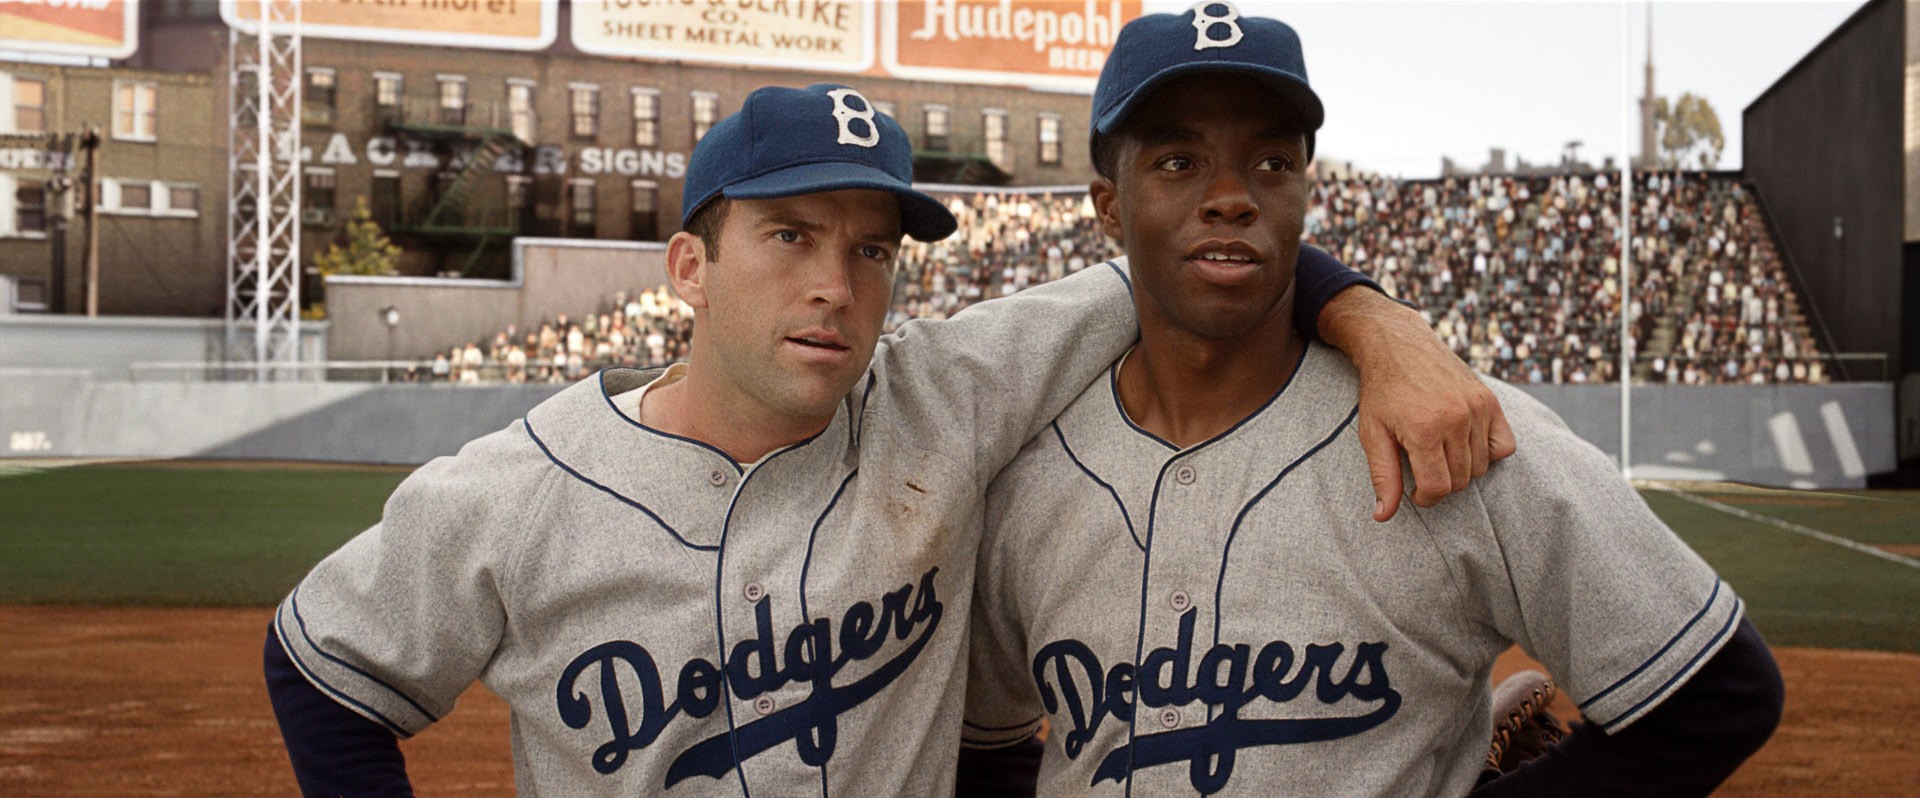 Lucas Black stars as Pee Wee Reese and Chadwick Boseman stars as Jackie Robinson in Warner Bros. Pictures' 42 (2013)